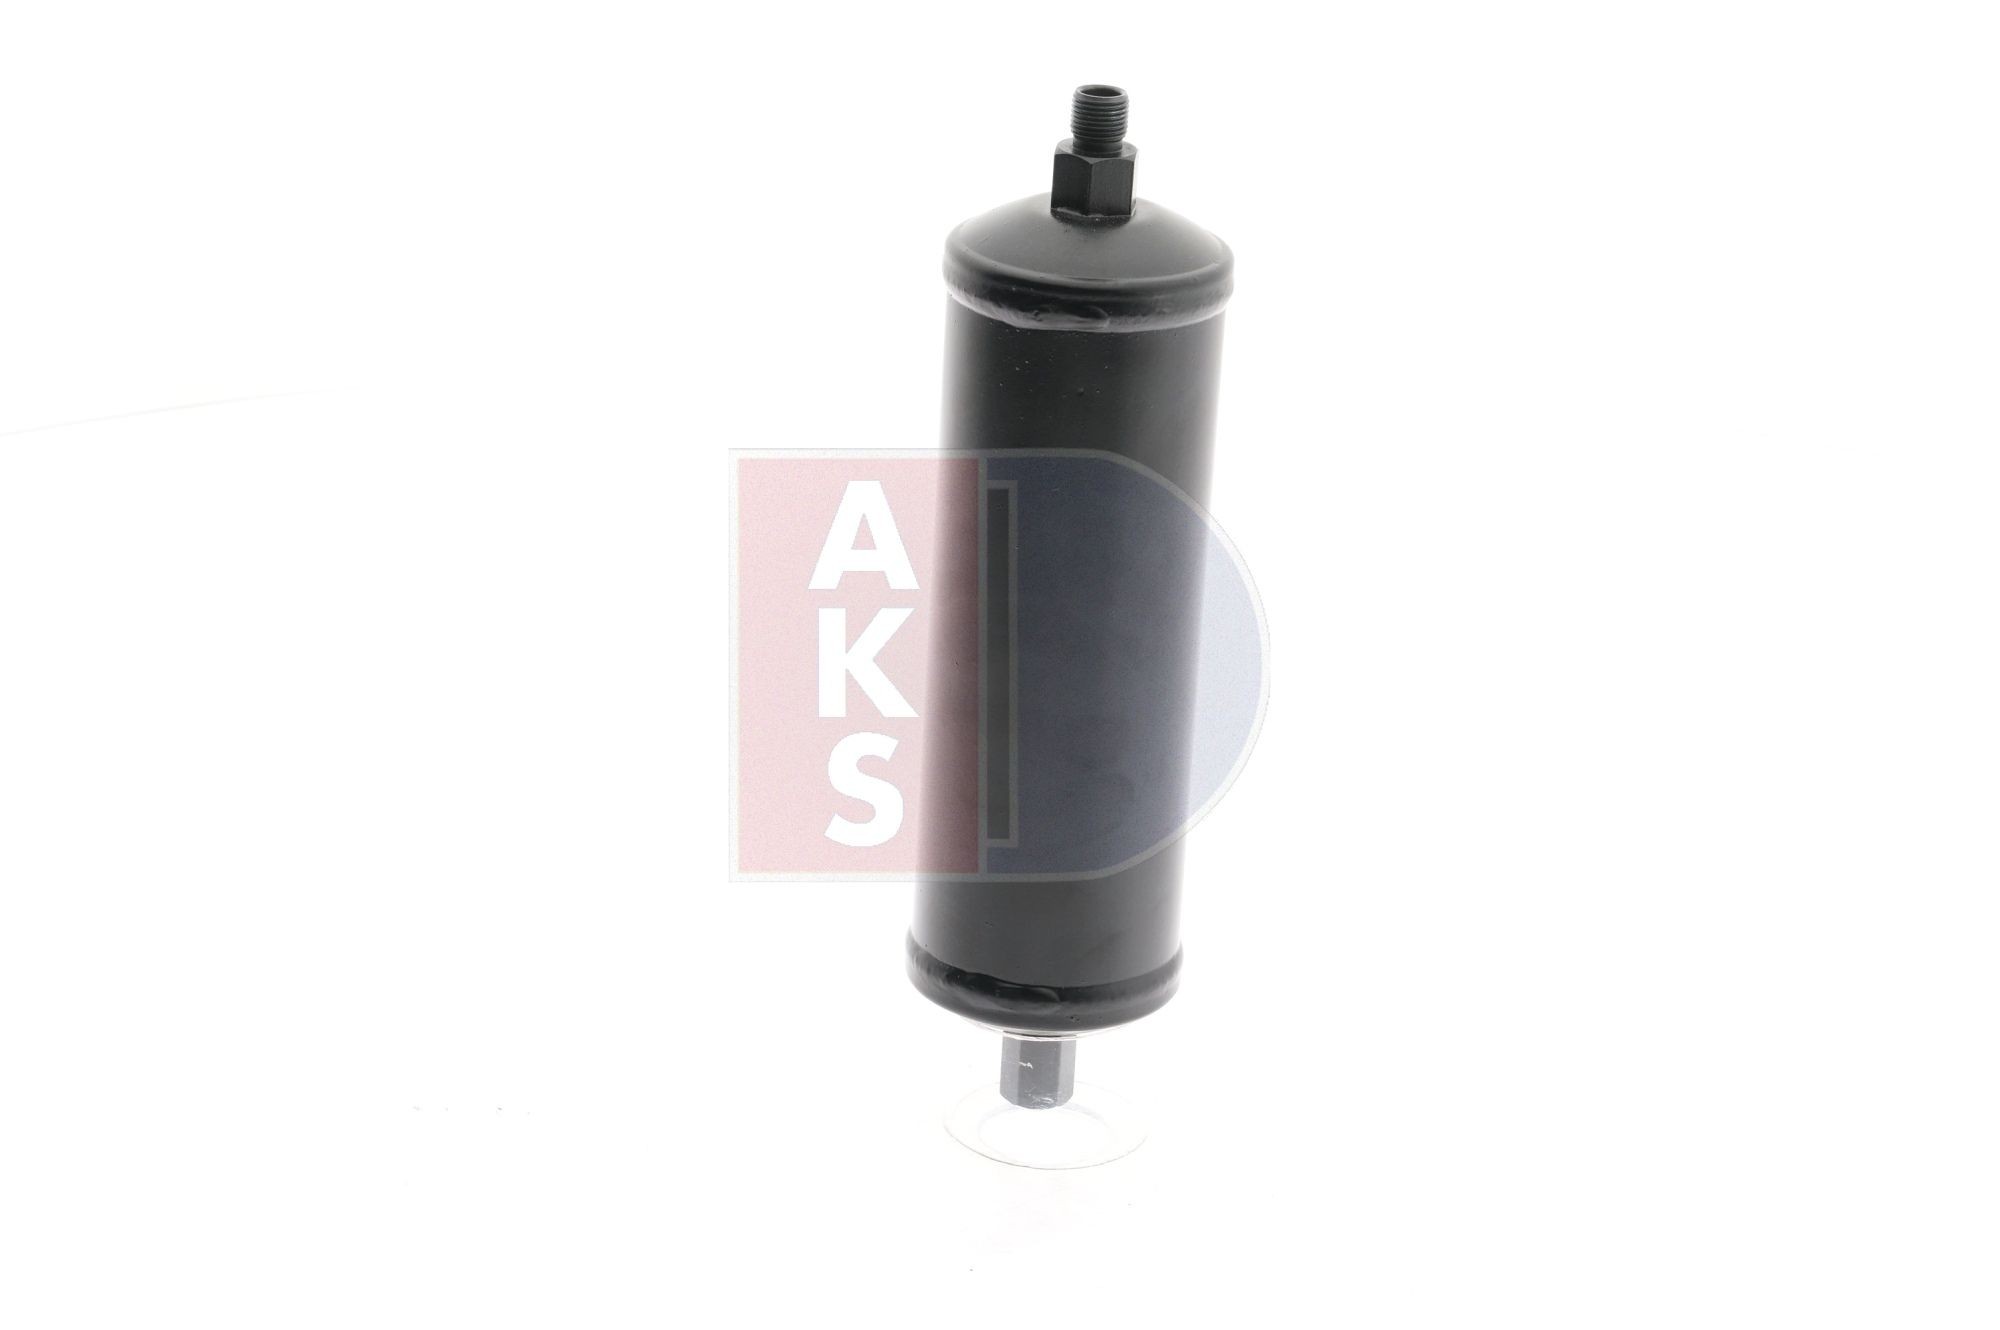 AKS DASIS 800552N Receiver drier 800552N – extensive range with large reductions